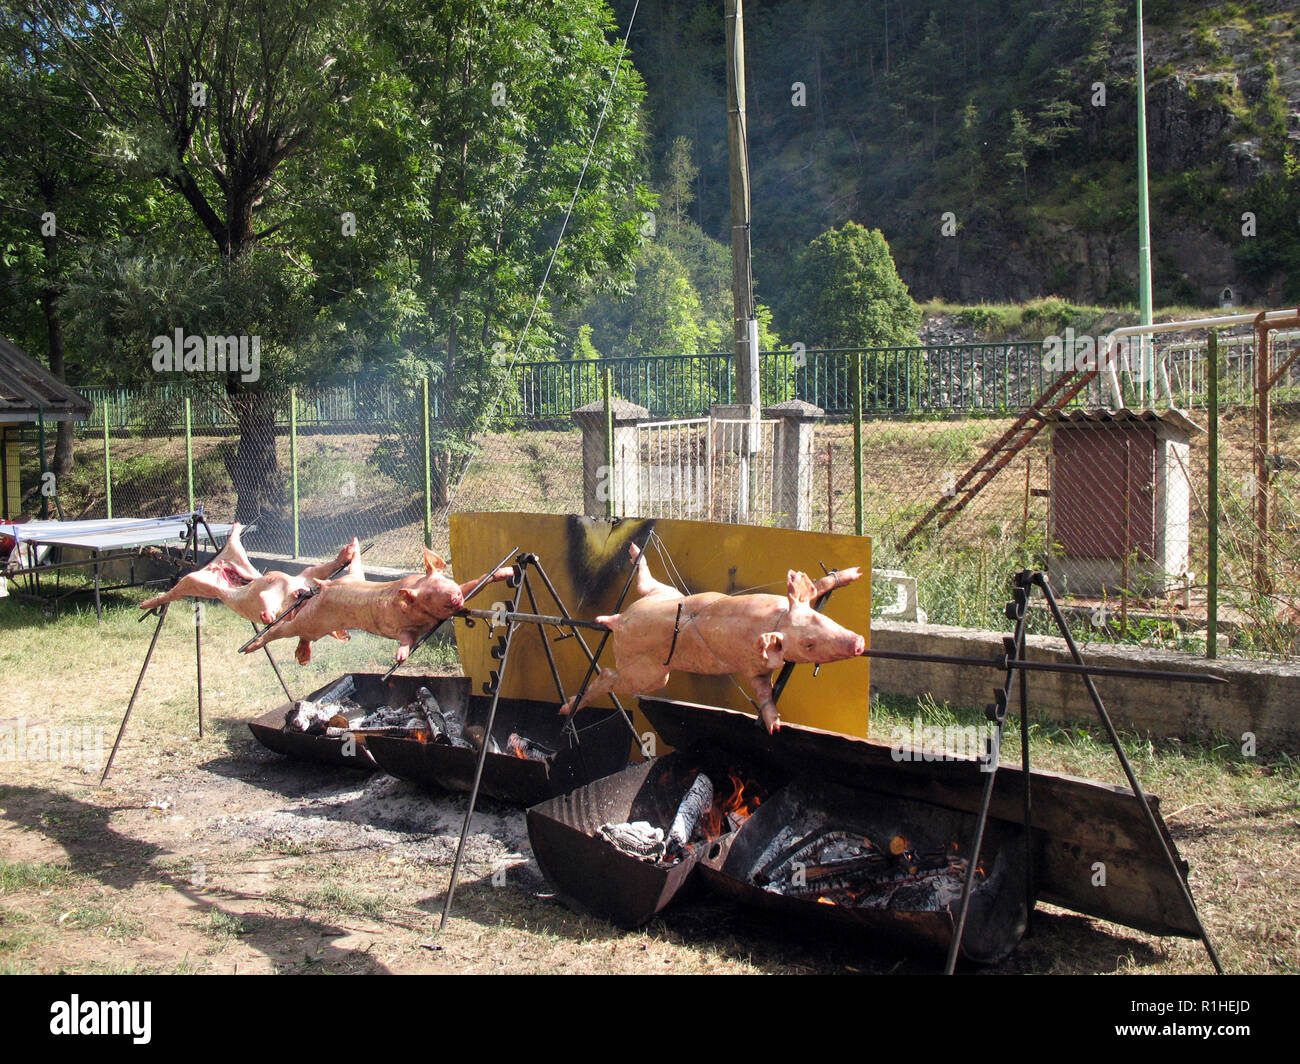 Hog roast on open spit in south france Stock Photo